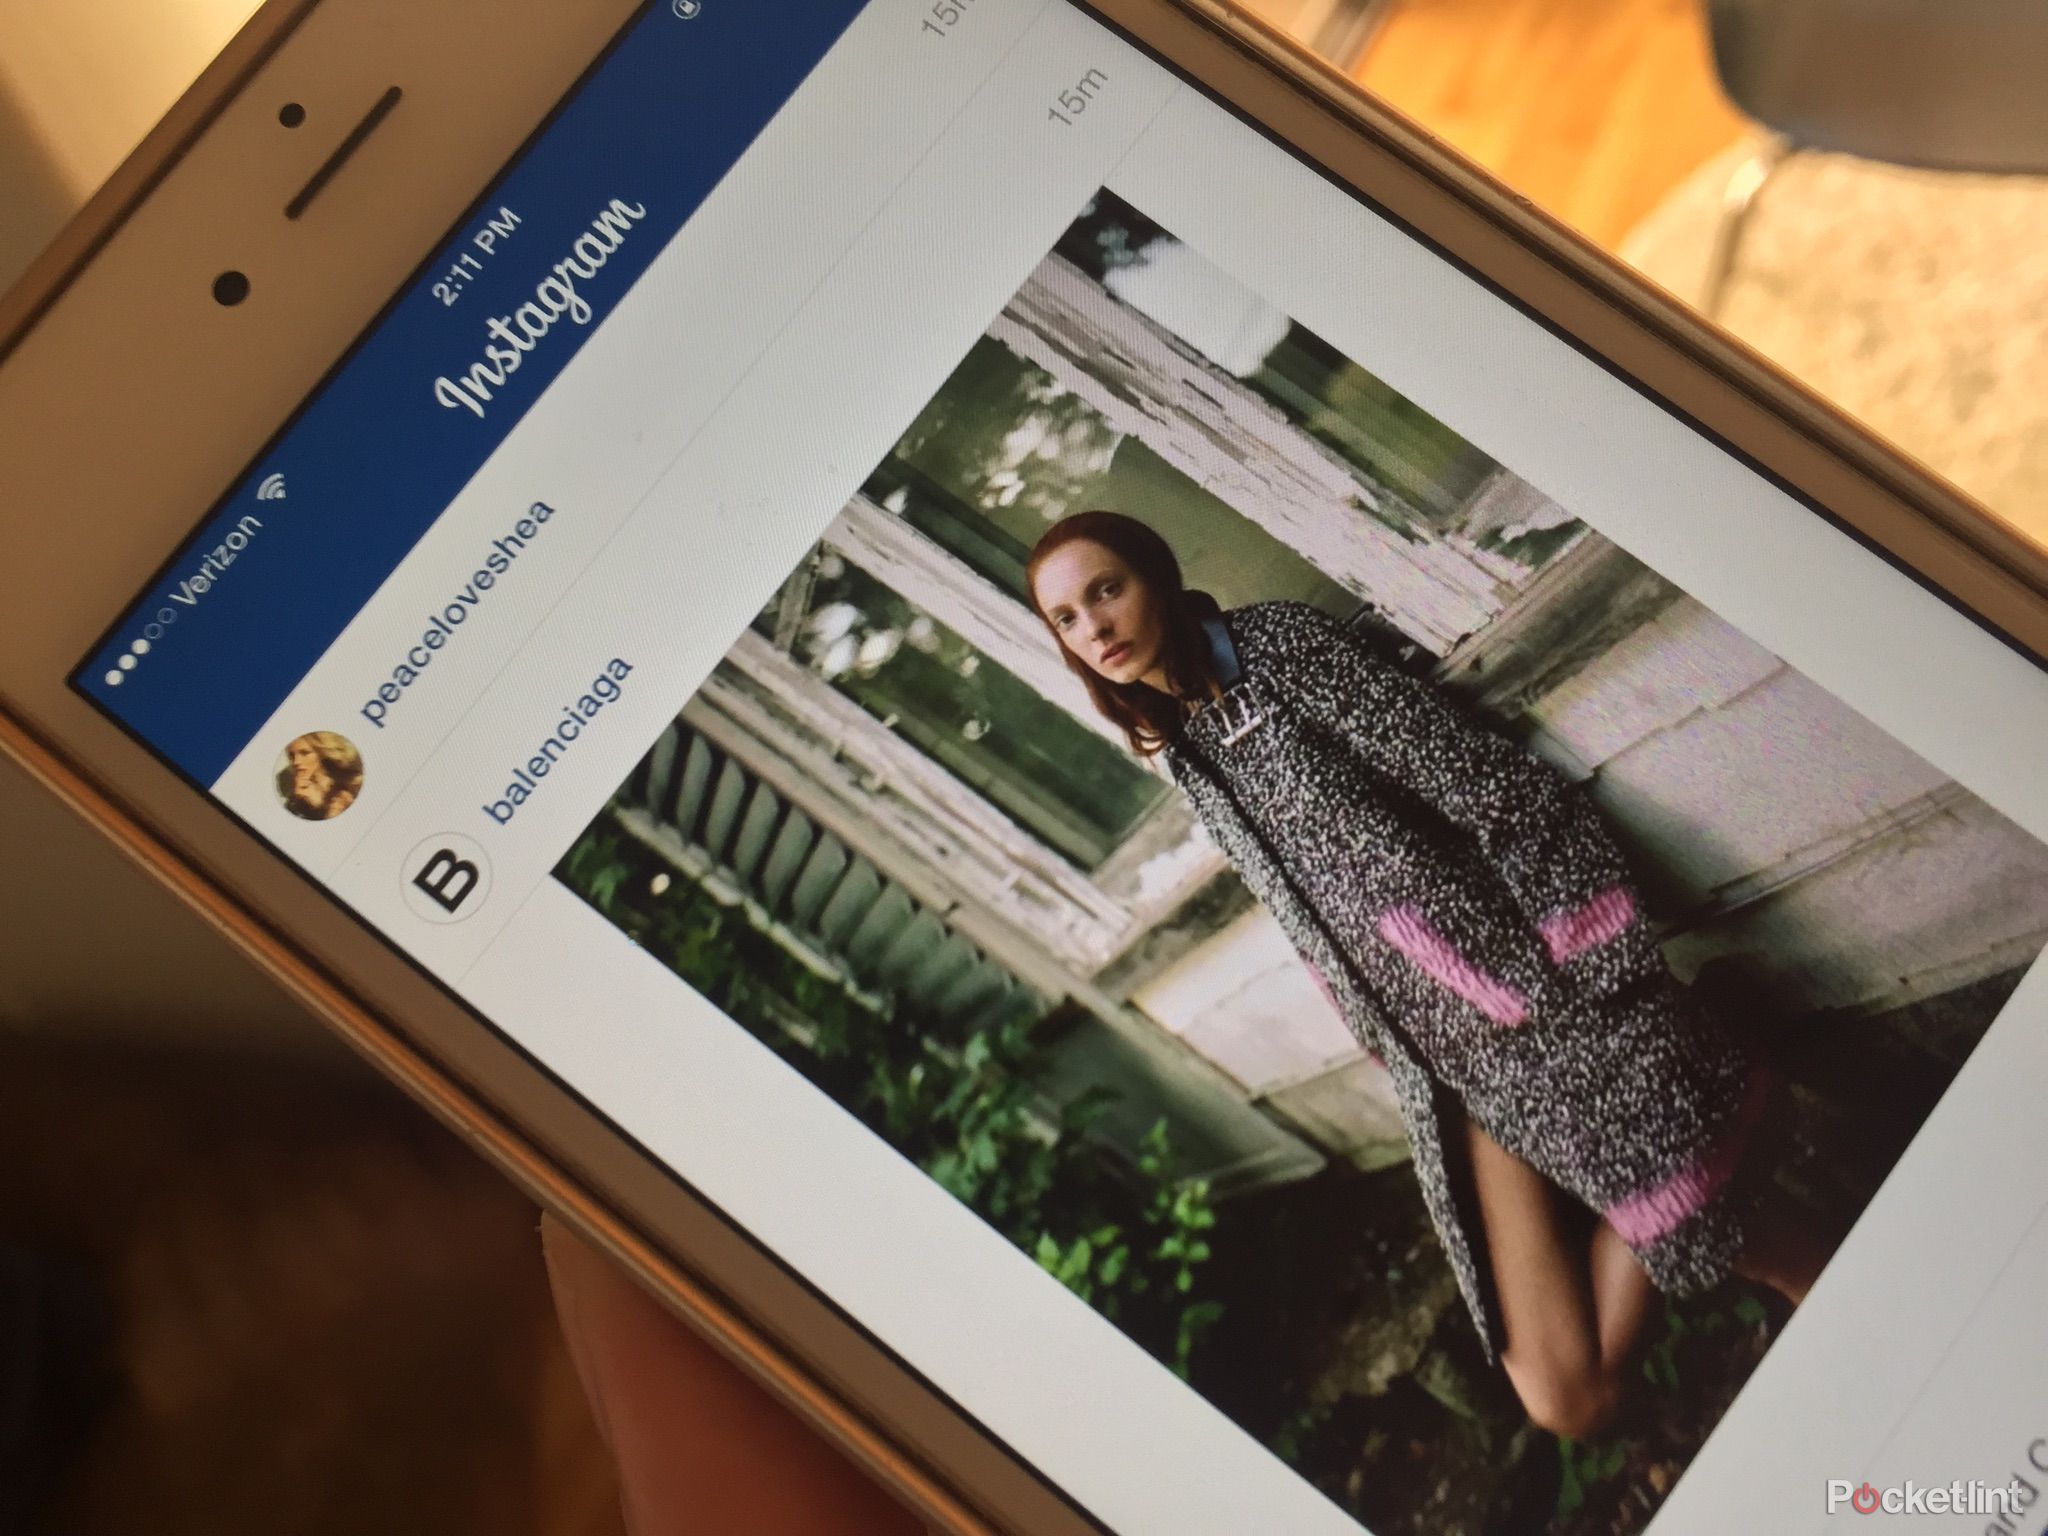 instagram steps outside the square you can now post in portrait and landscape image 1